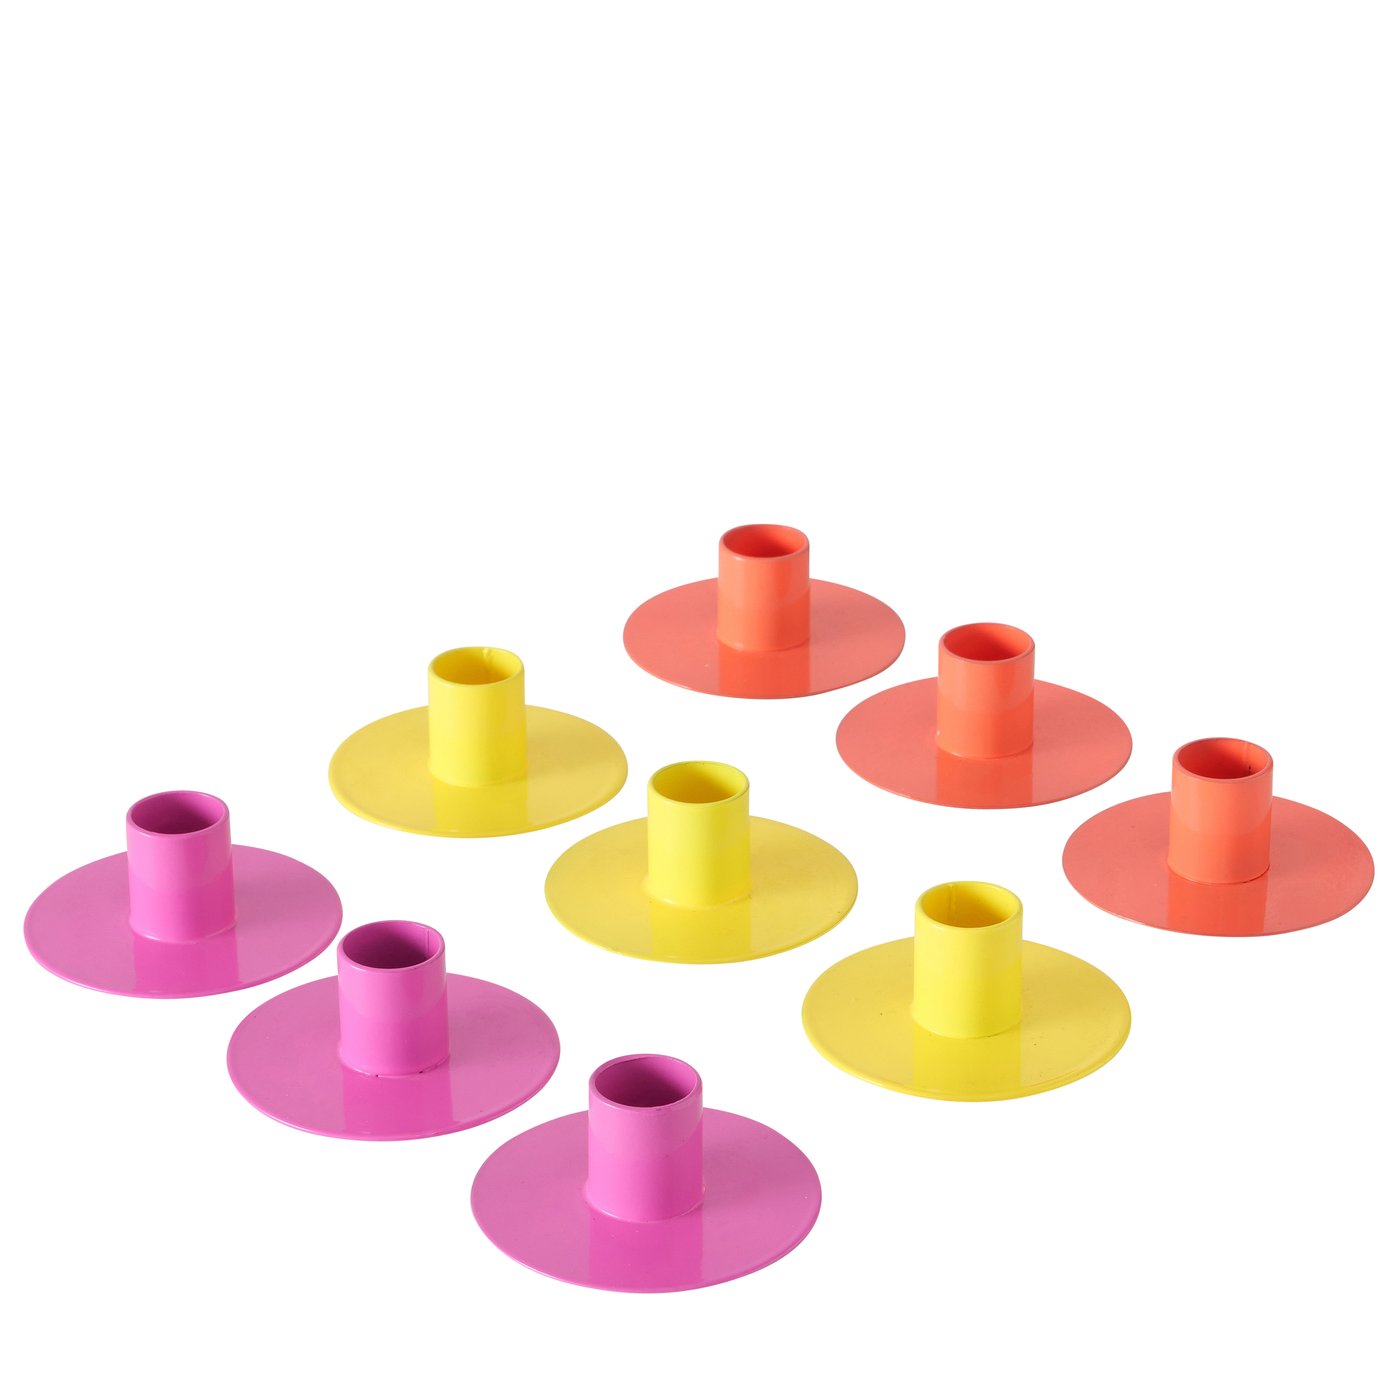 &Quirky Colour Pop Candle Holder : Set of 3 - Pink, Orange or Yellow